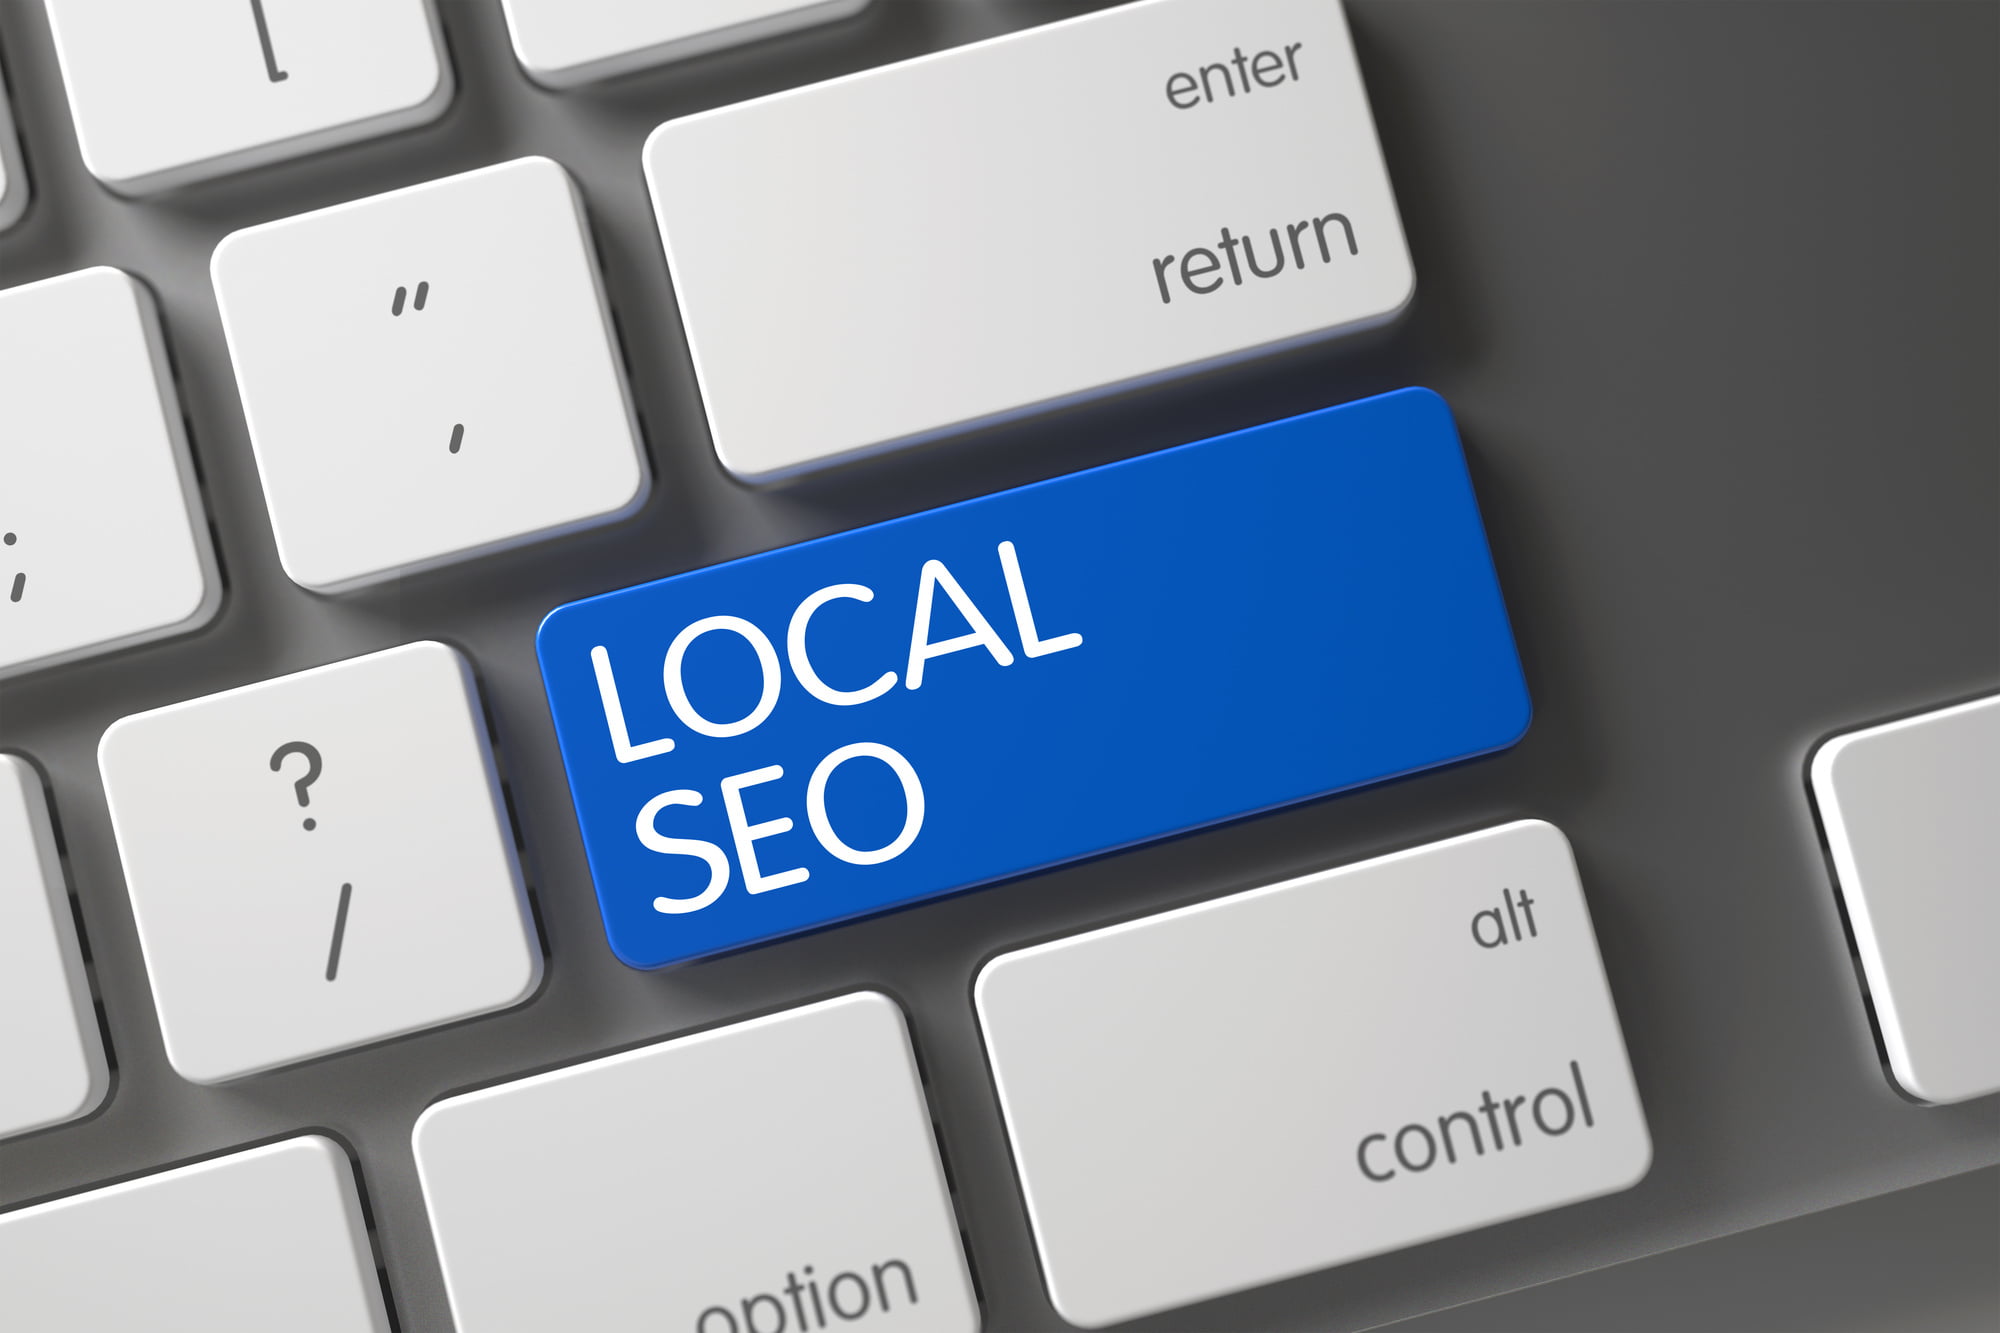 What do you know about using local SEO services? Learn how to get the most out of your campaigns here in this brief guide.